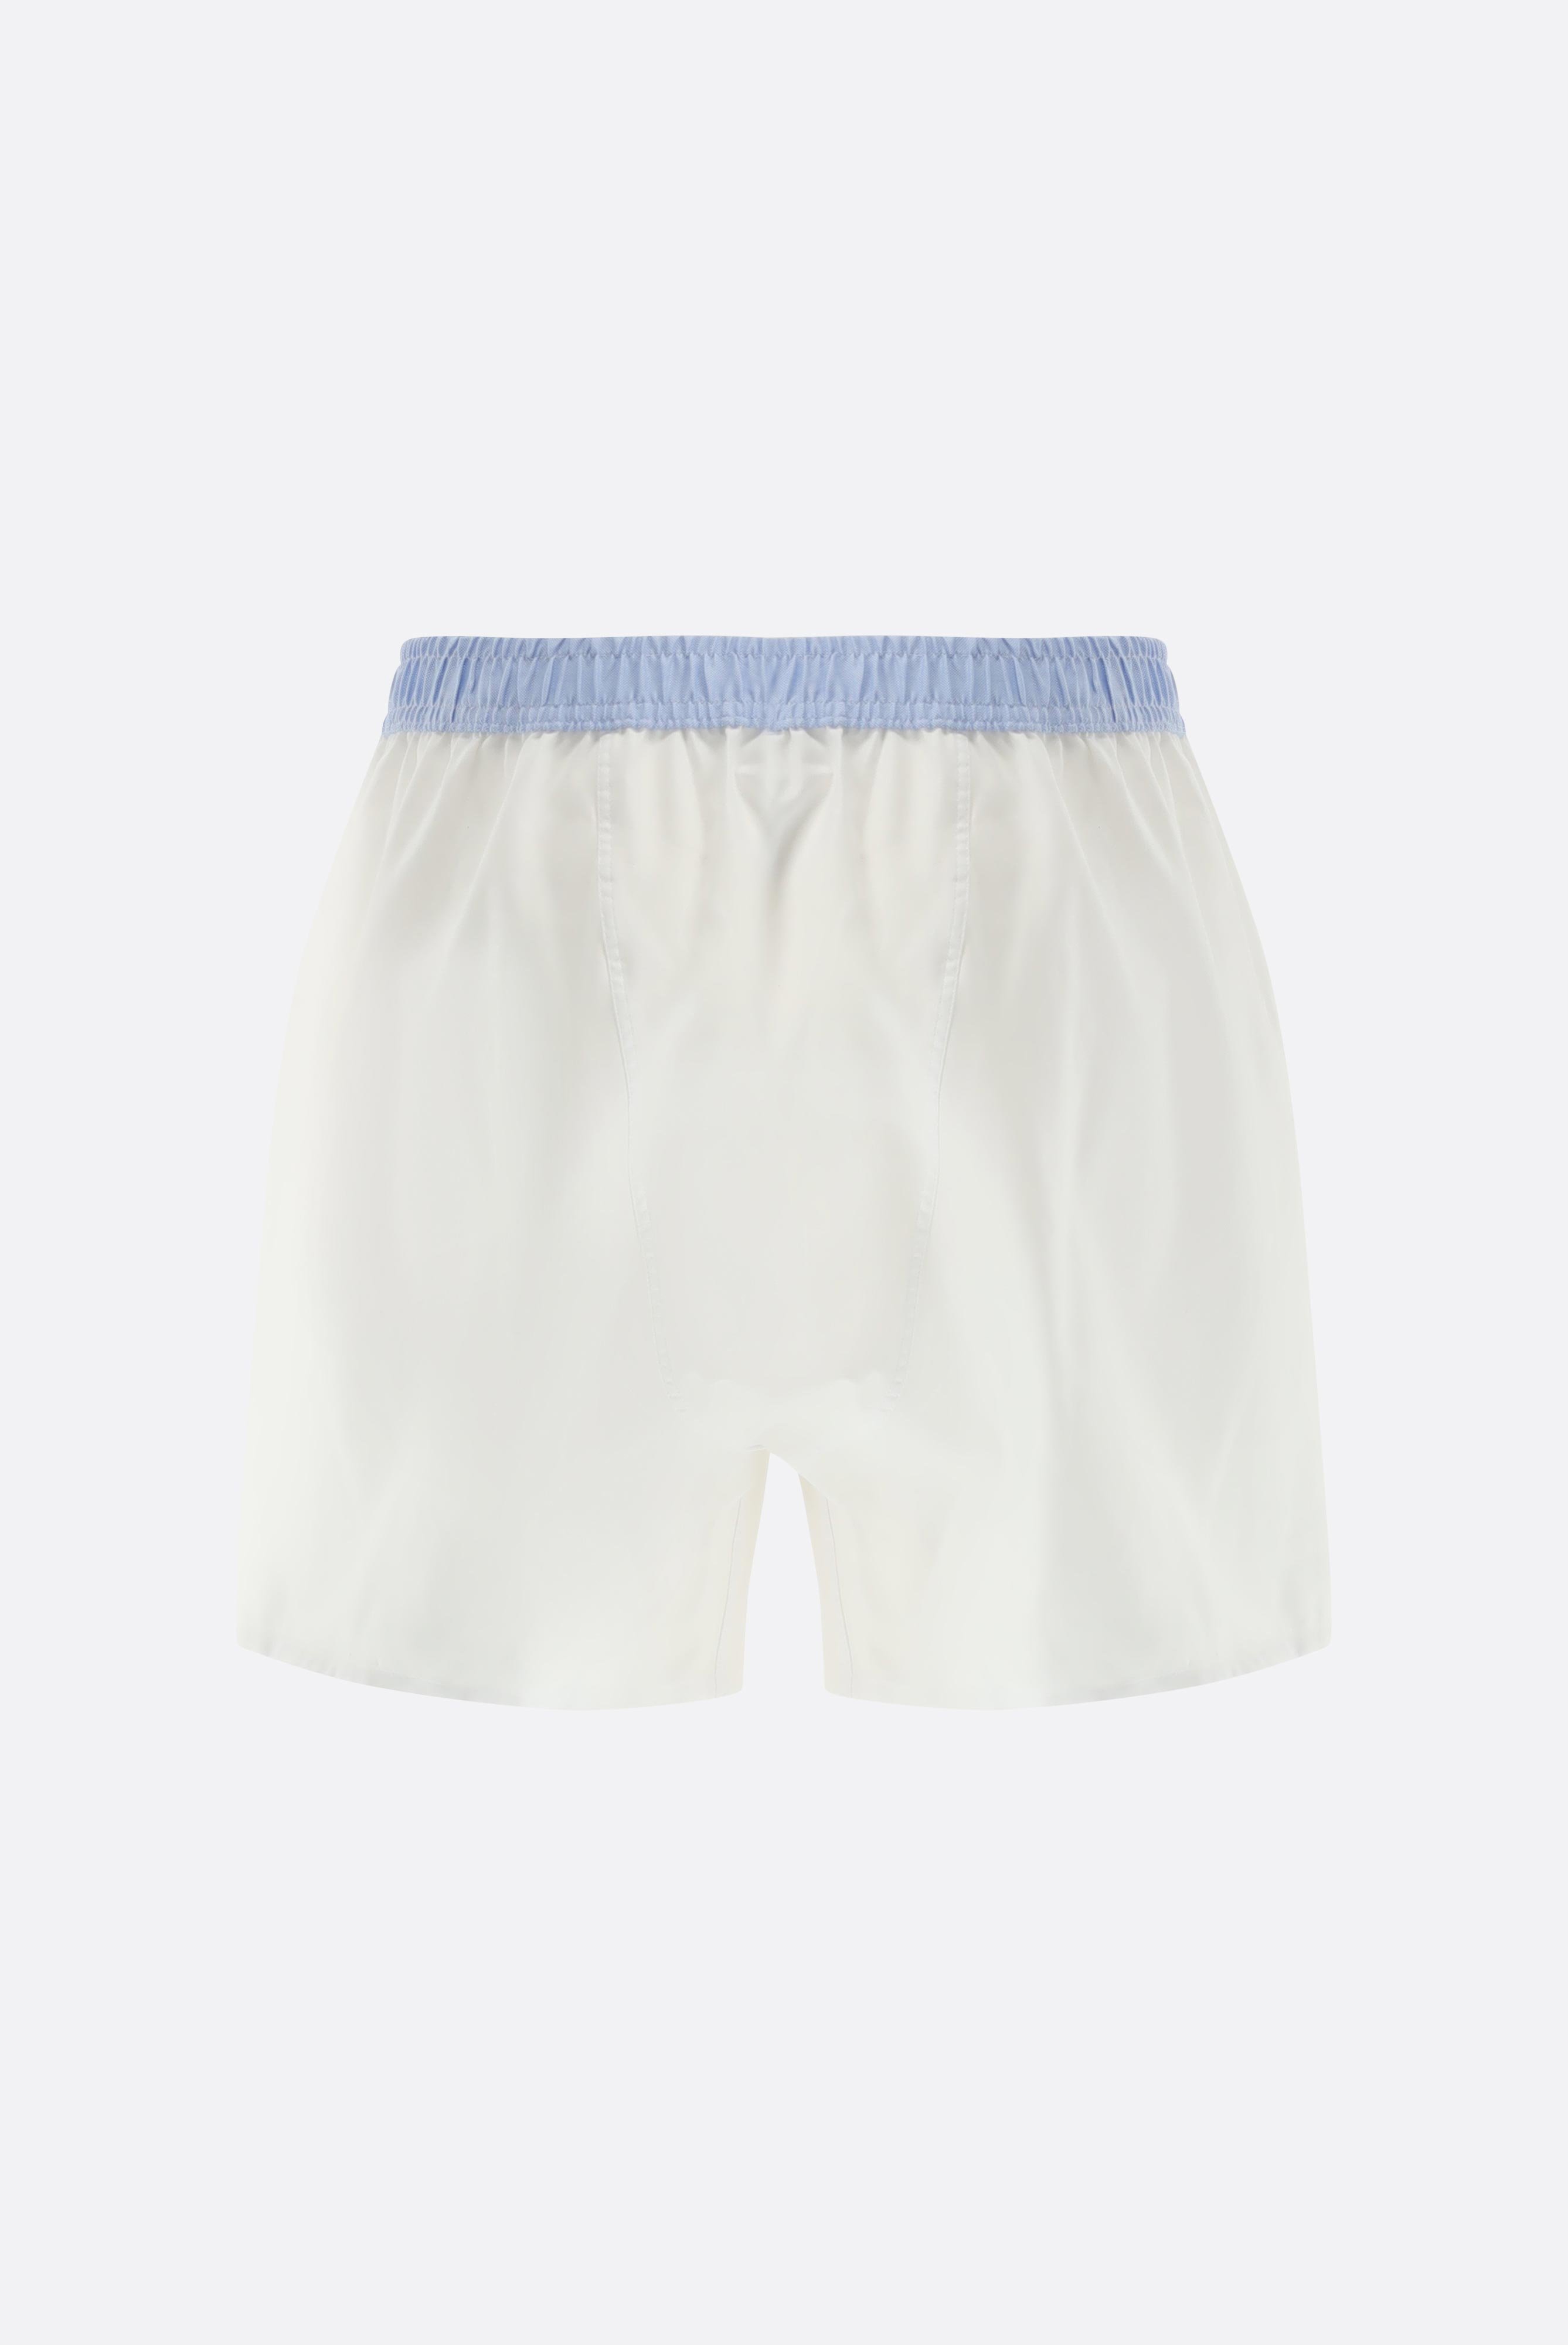 Underwear+Oxford Boxer Shorts with Waistband Contrast+91.1100.V1.150251.000.46